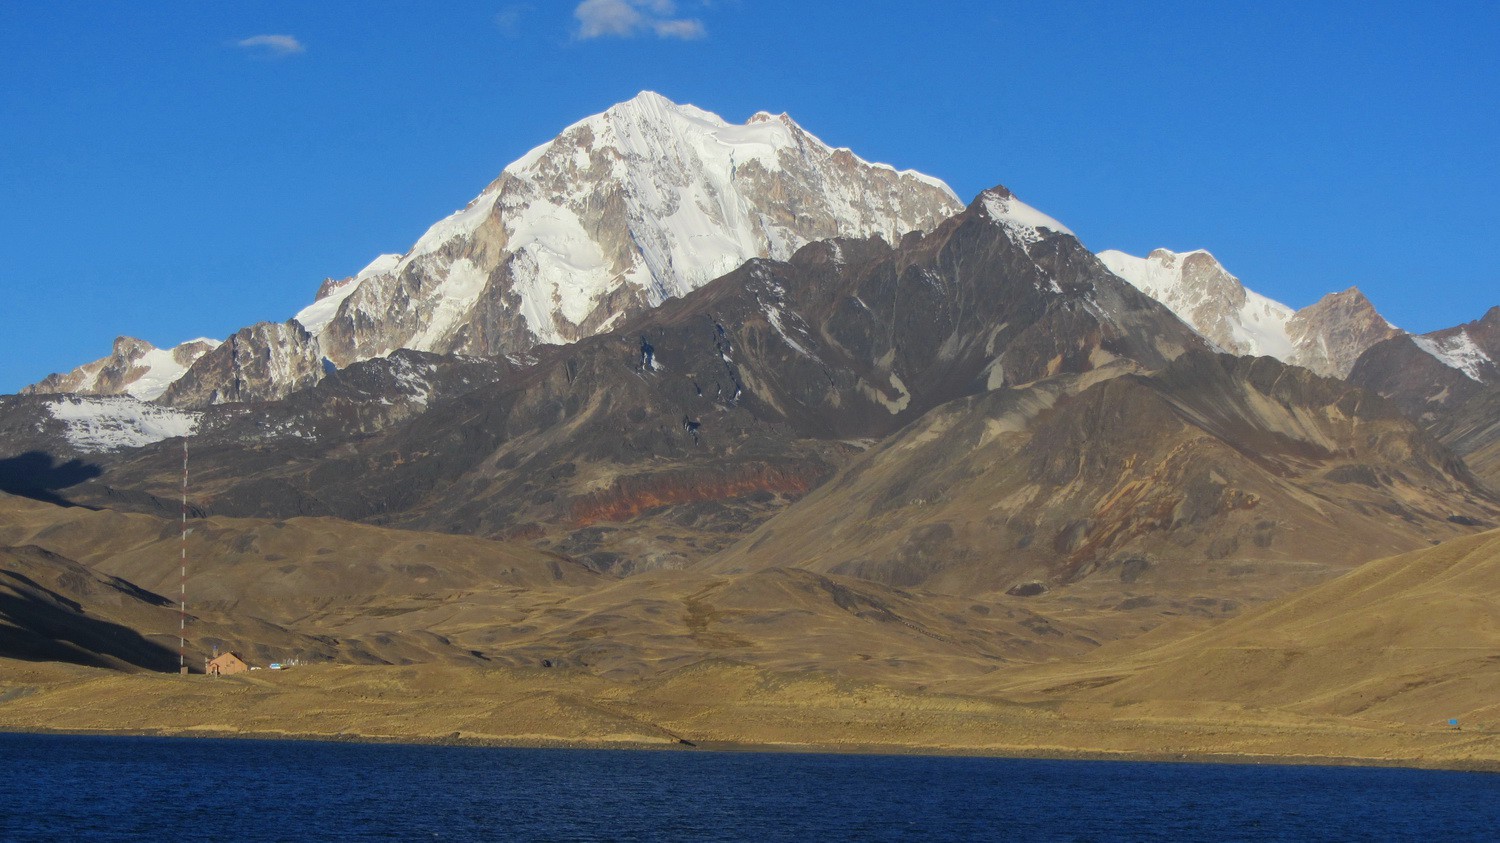 Laguna Tuni with Huayna Potosi, Maria Lloco and the house of the caretaker of the water for La Paz (down left corner)